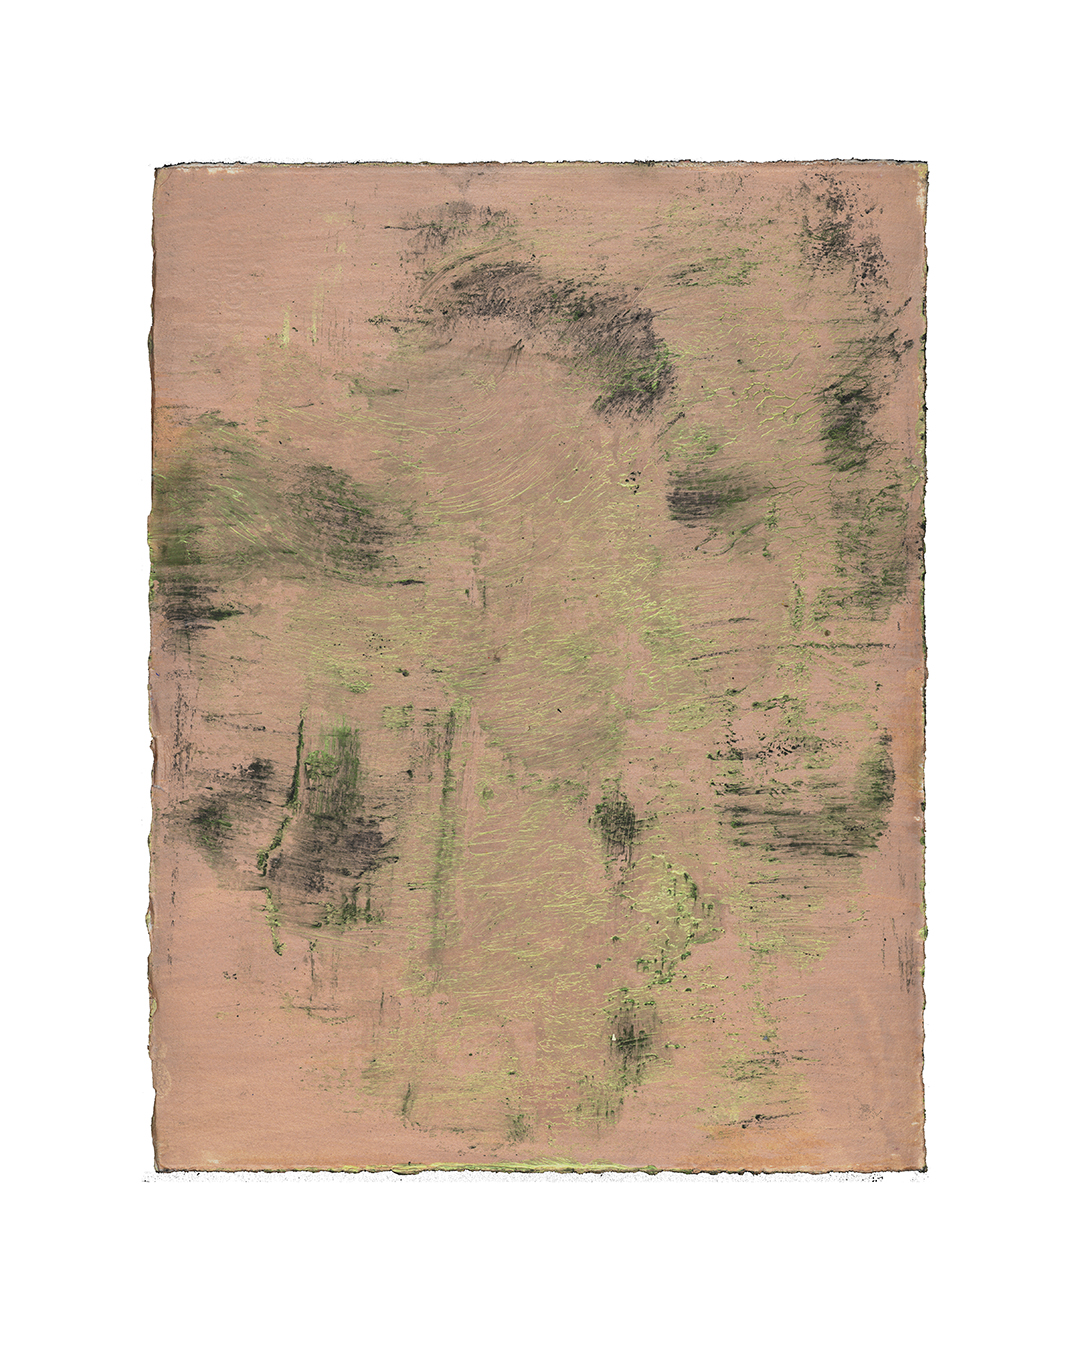 Piet Dieleman, untitled, 2020, painting, pigment, acrylic paint on paper, 380 x 285 mm, €930